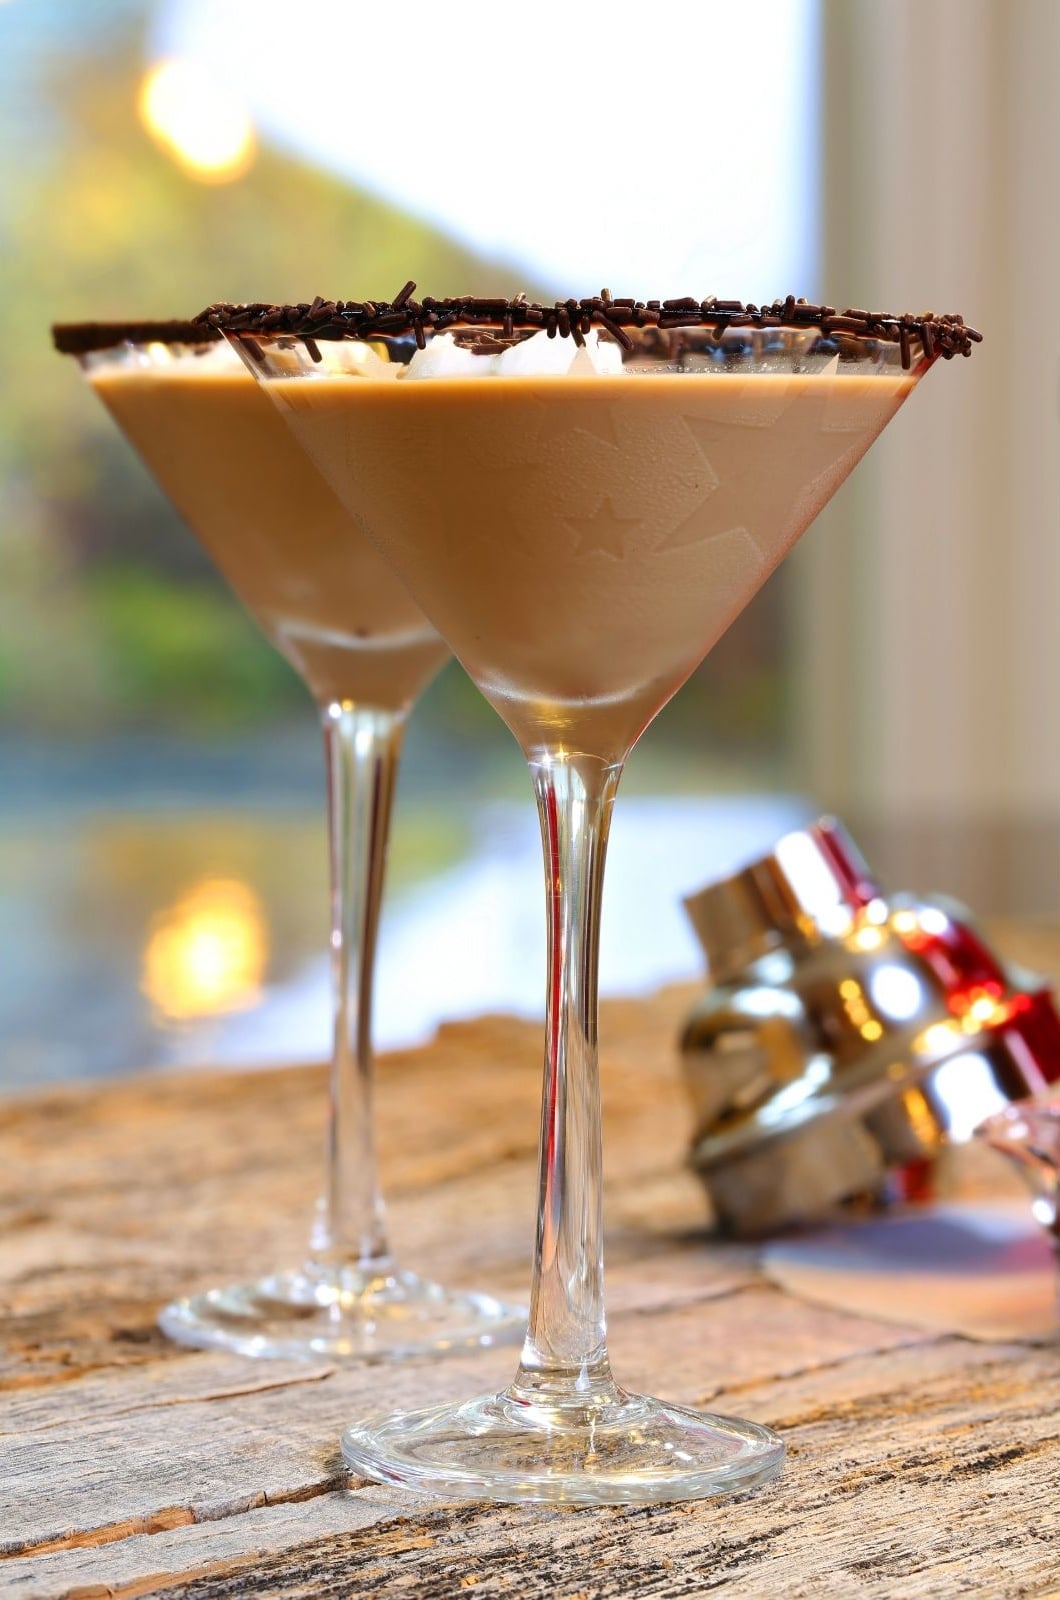 two martini glasses with chocolate martinis